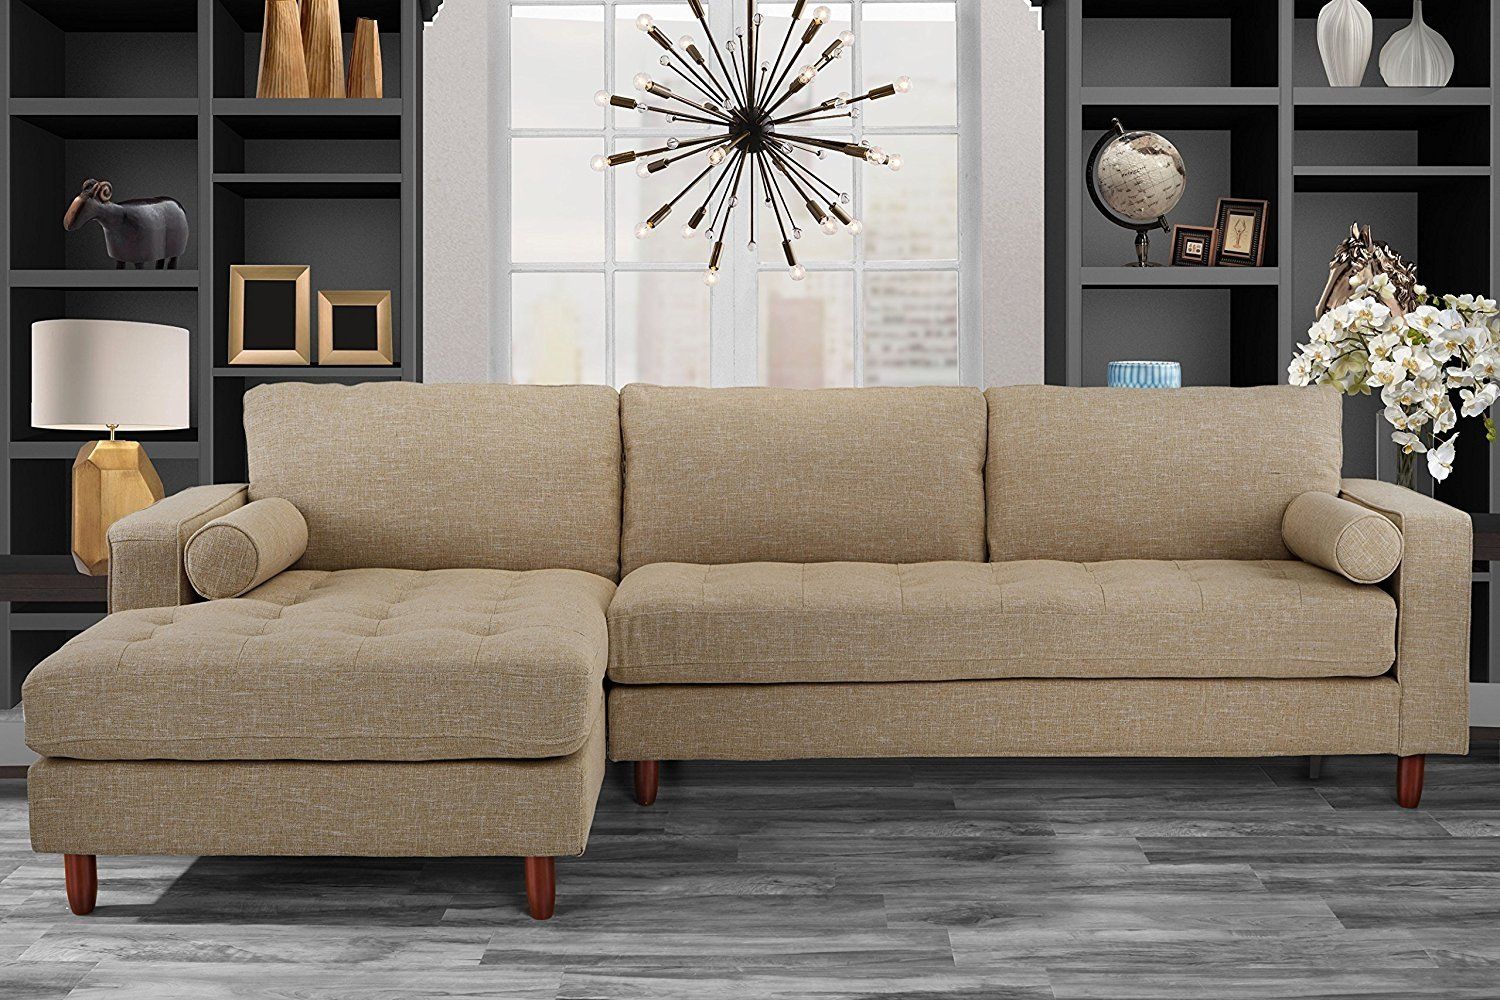 Mid Century Modern Tufted Fabric Sectional Sofa, L Shape Couch Beige For Beige L Shaped Sectional Sofas (View 3 of 20)